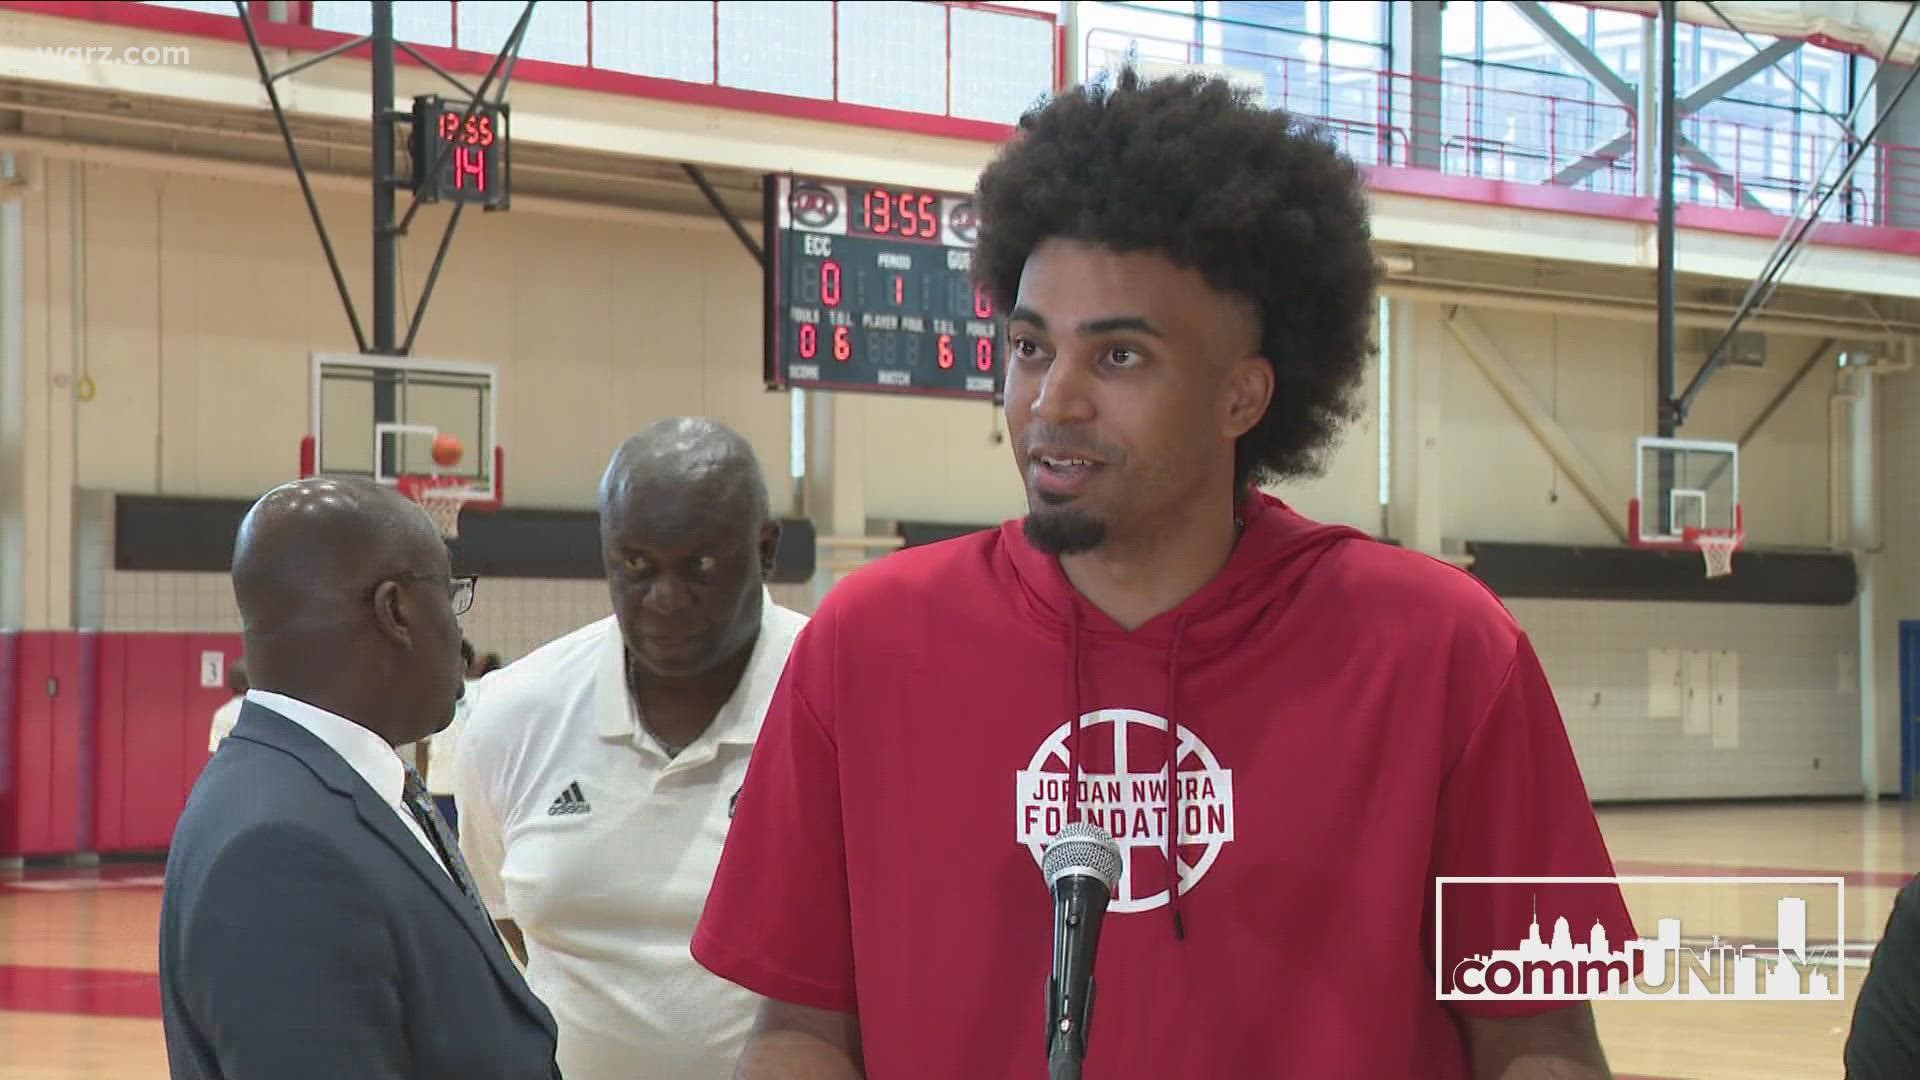 Jordan Nwora is all about giving back to the city's children, and inspiring confidence.